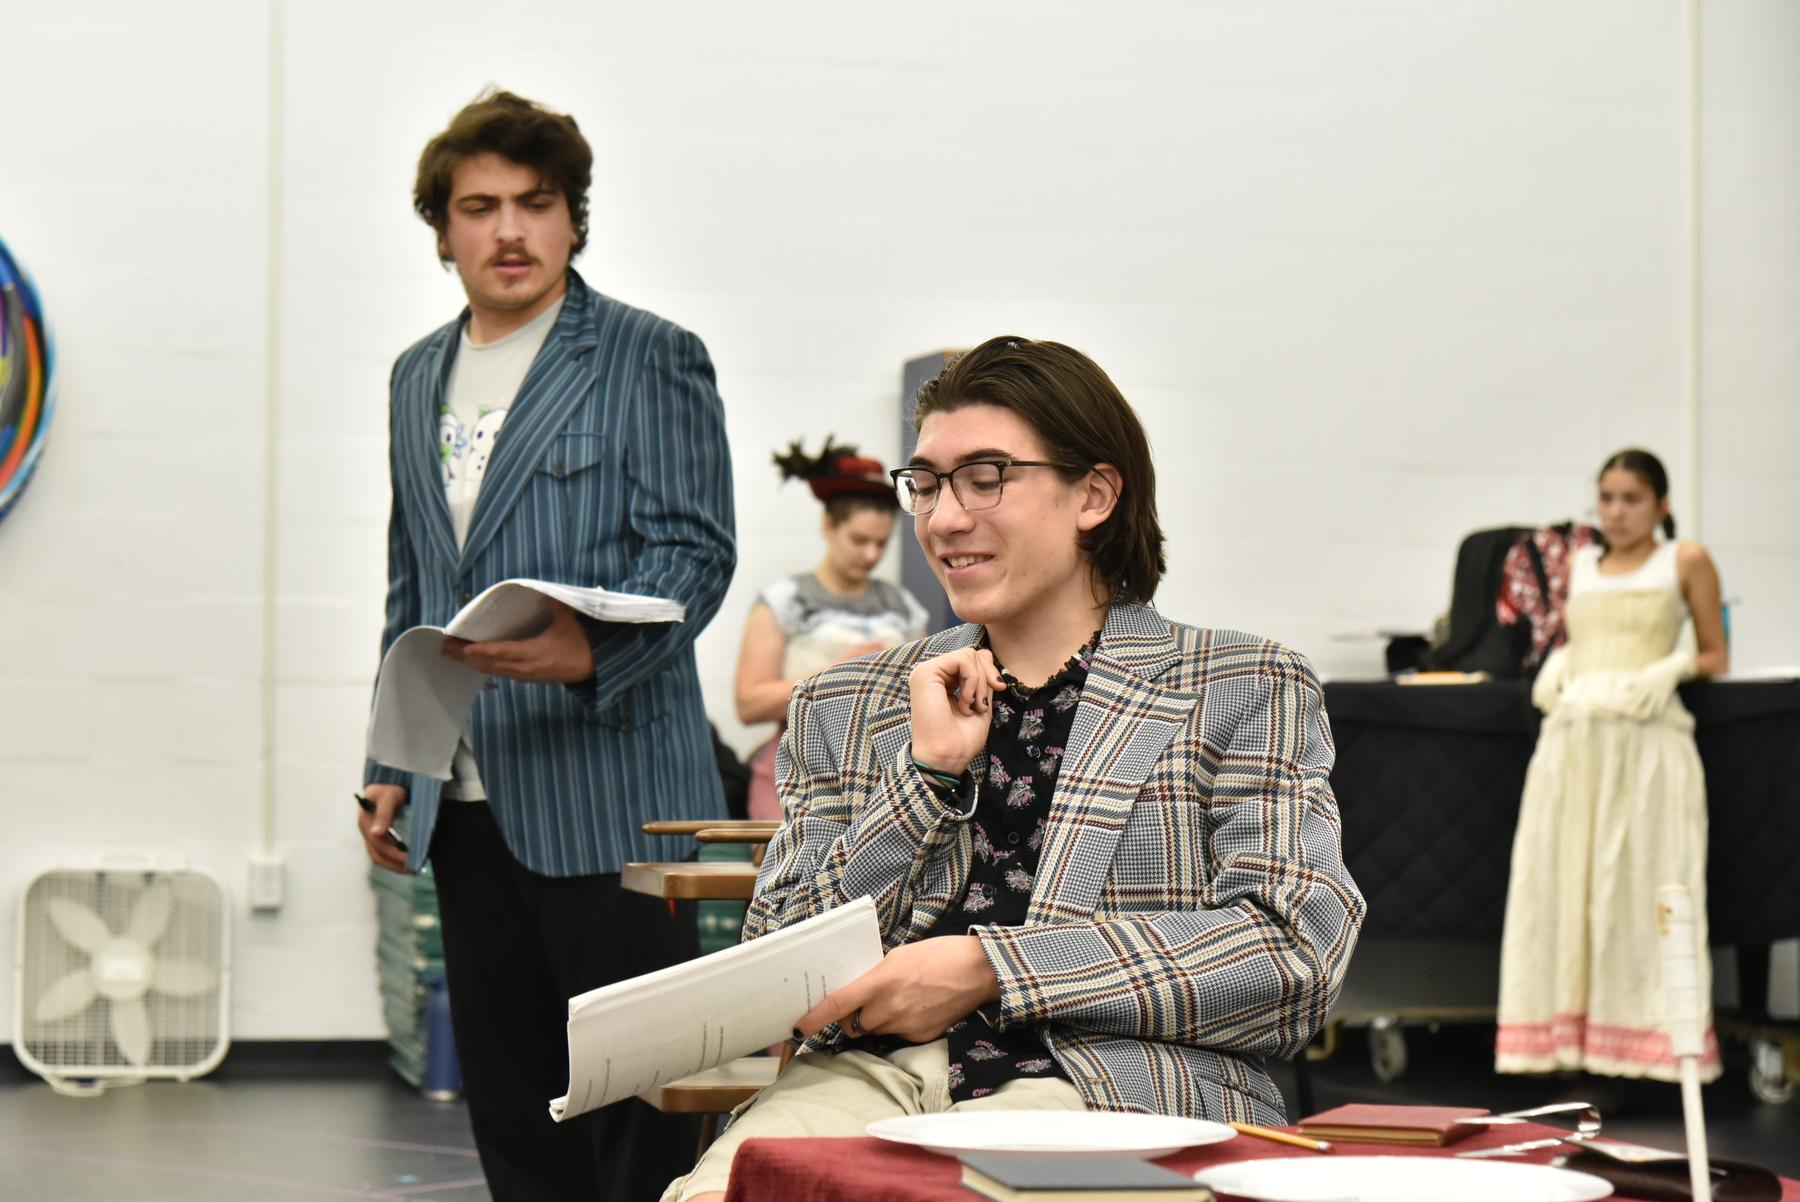 Rehearsal image from "The Importance of Being Earnest"